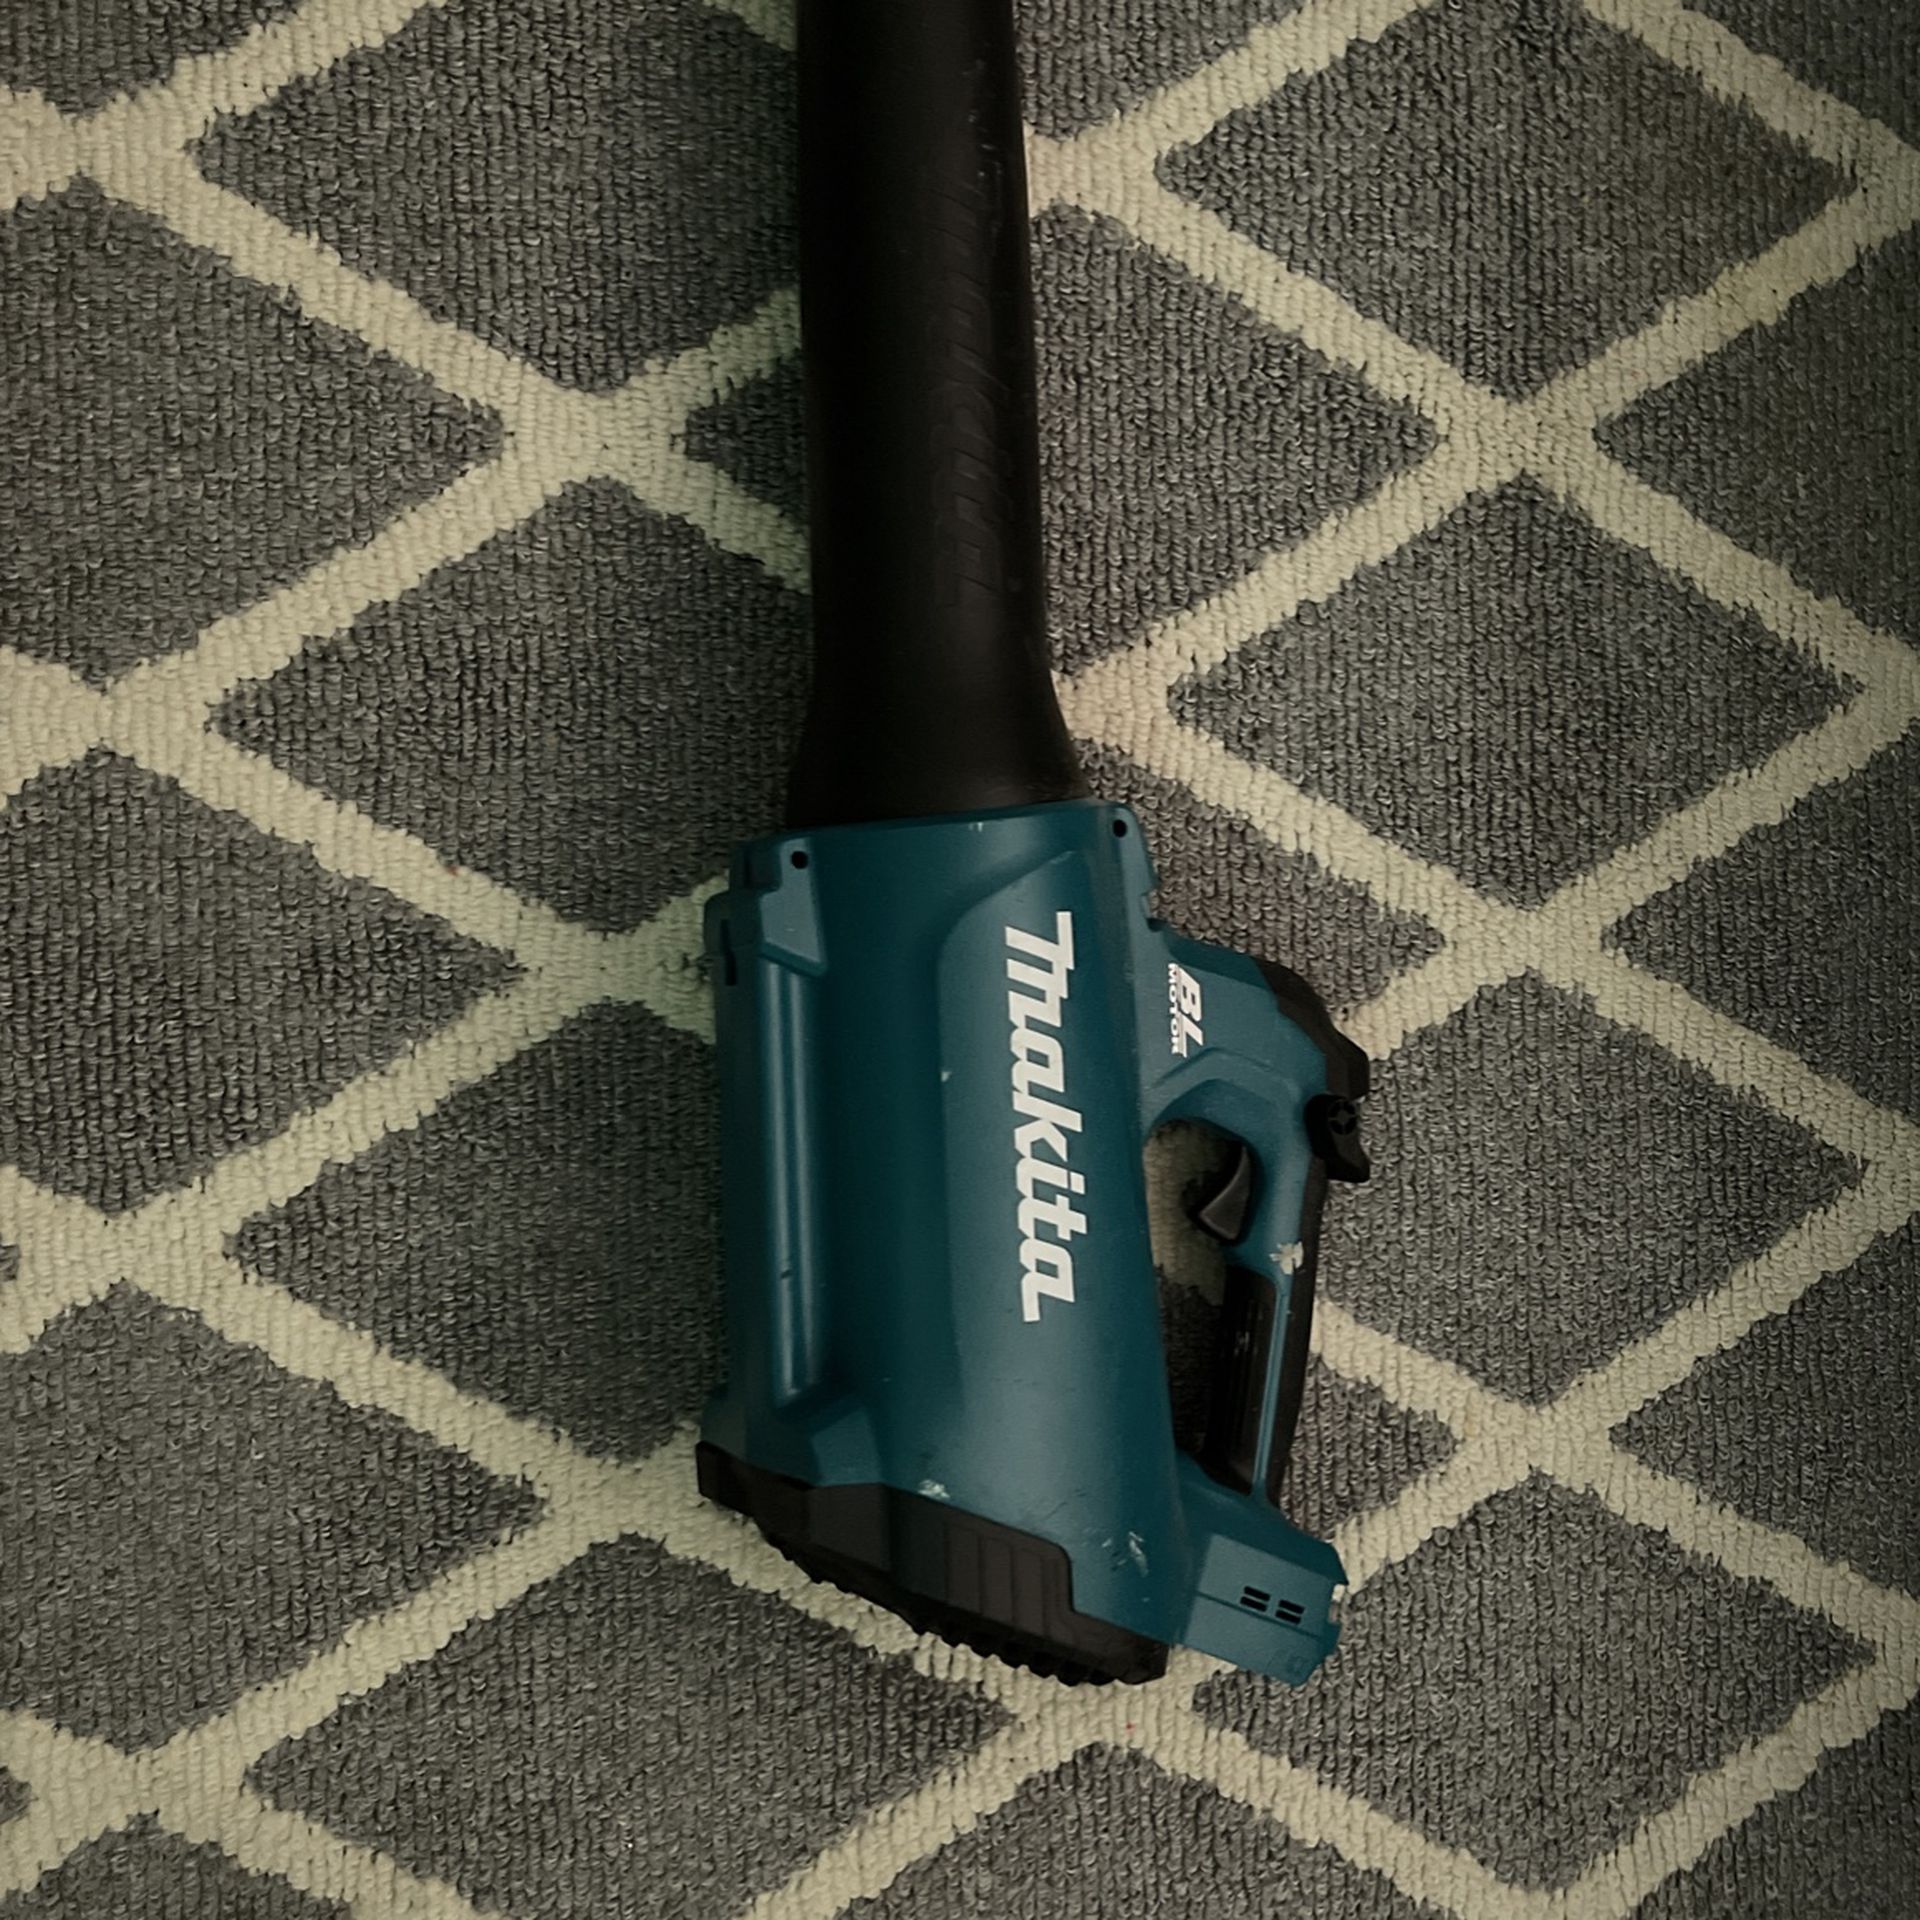 Brushless Makita 18v  Leaf Blower 80$ Used A Few Times Only Baterie Not Included  